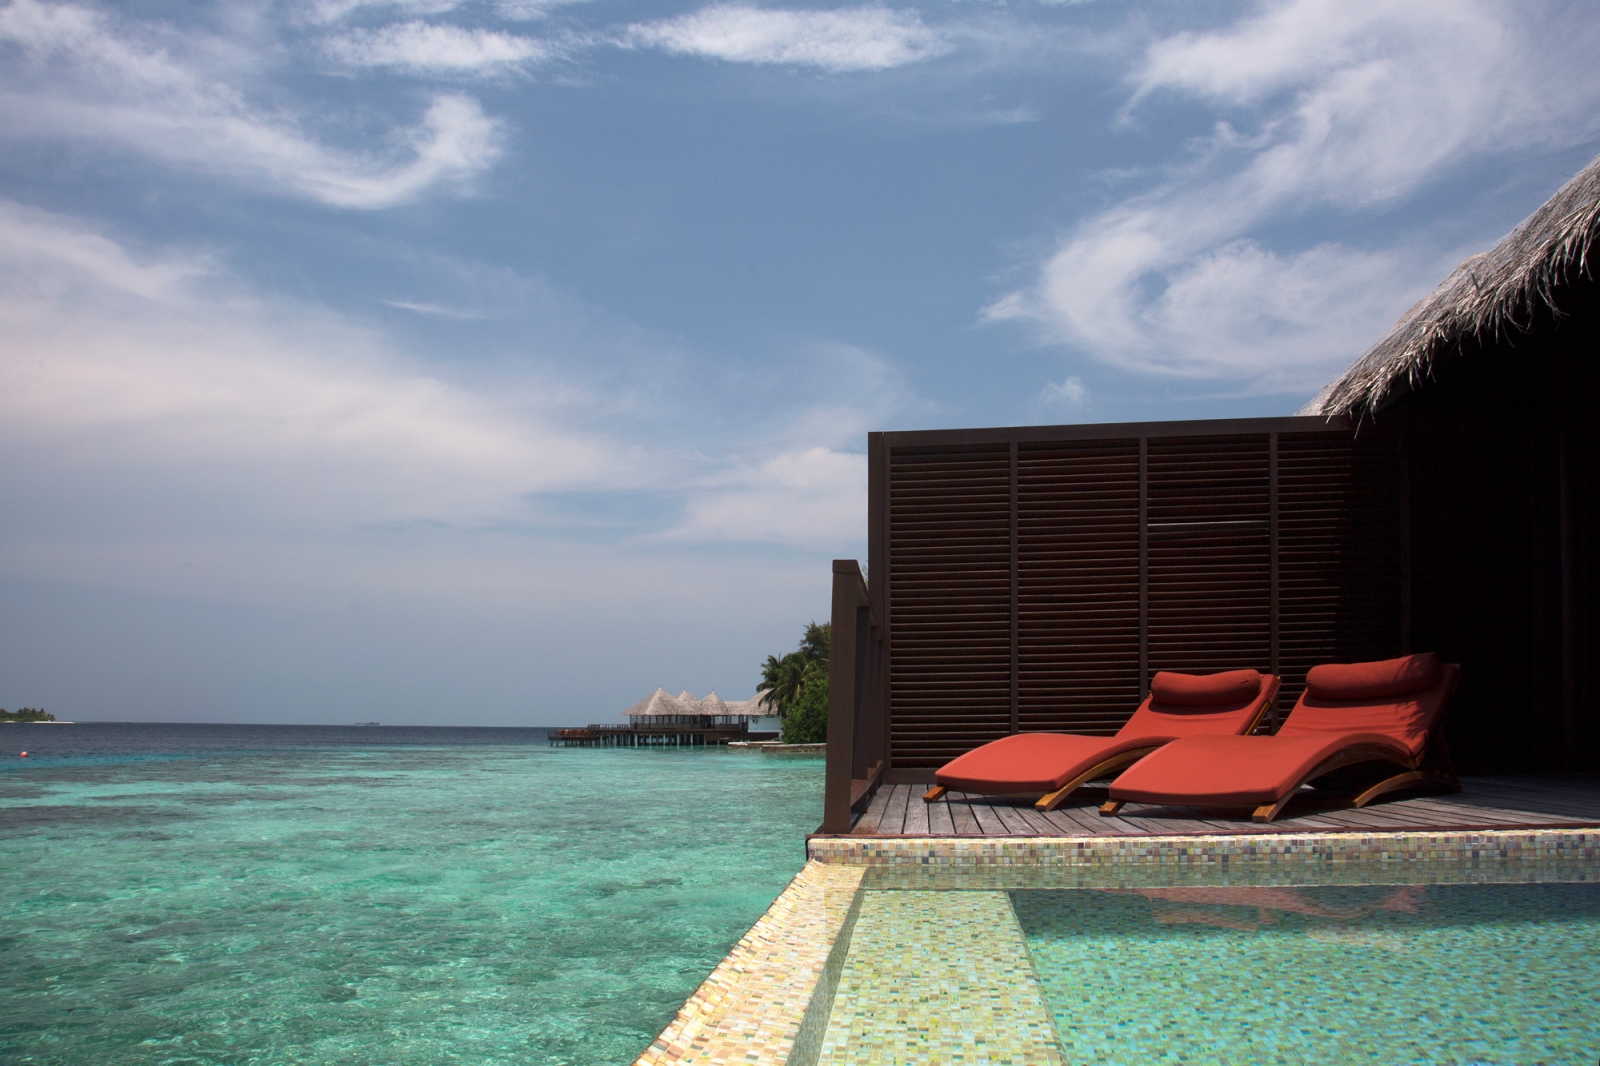 content/hotel/Coco Bodu Hithi/Accommodation/Water Villa/CocoBodu-Acc-WaterVilla-01.jpg